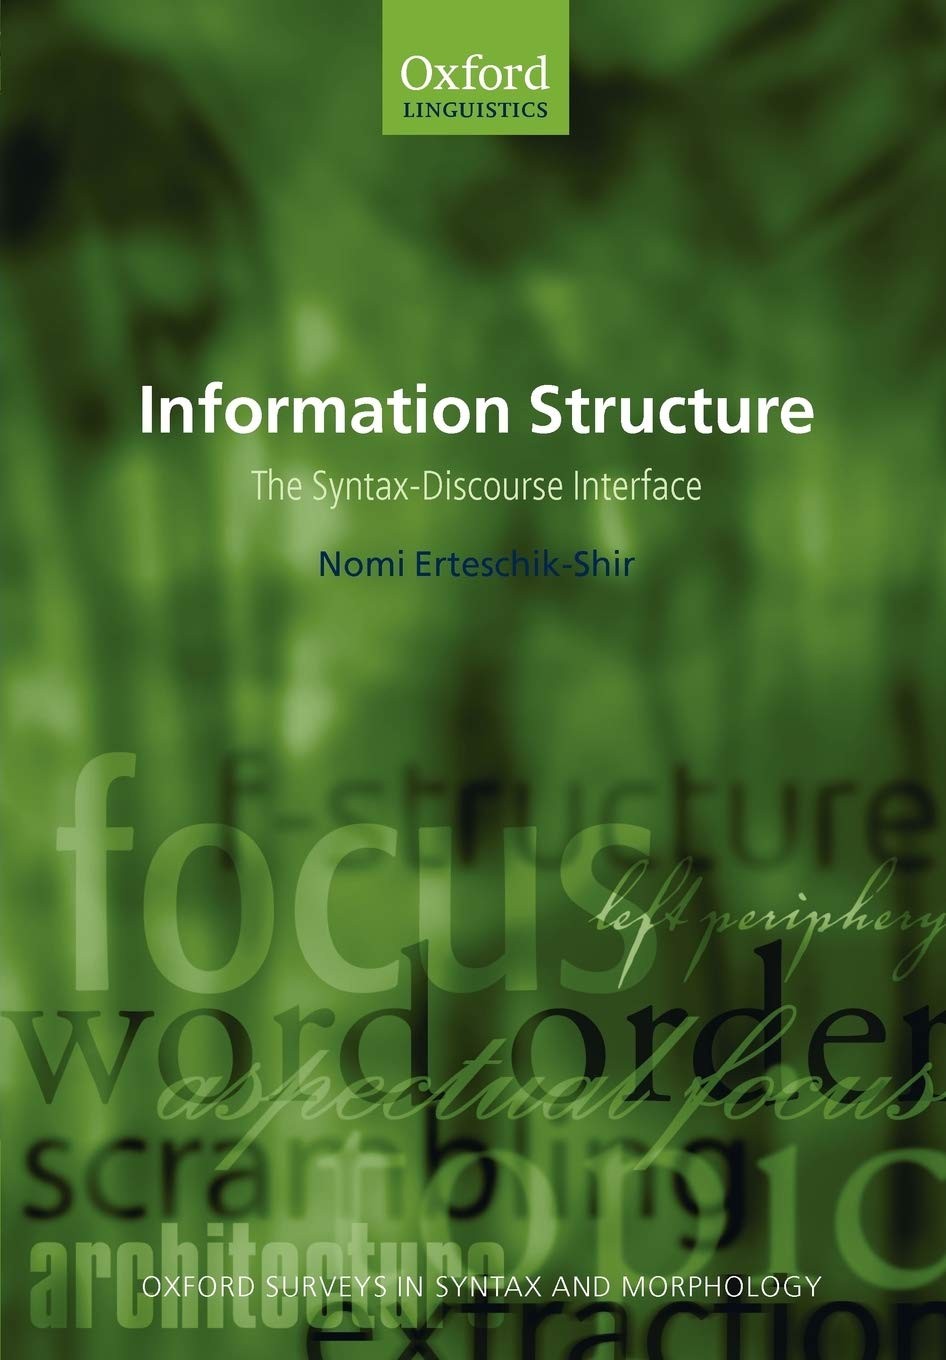 Information Structure: The Syntax-Discourse Interface